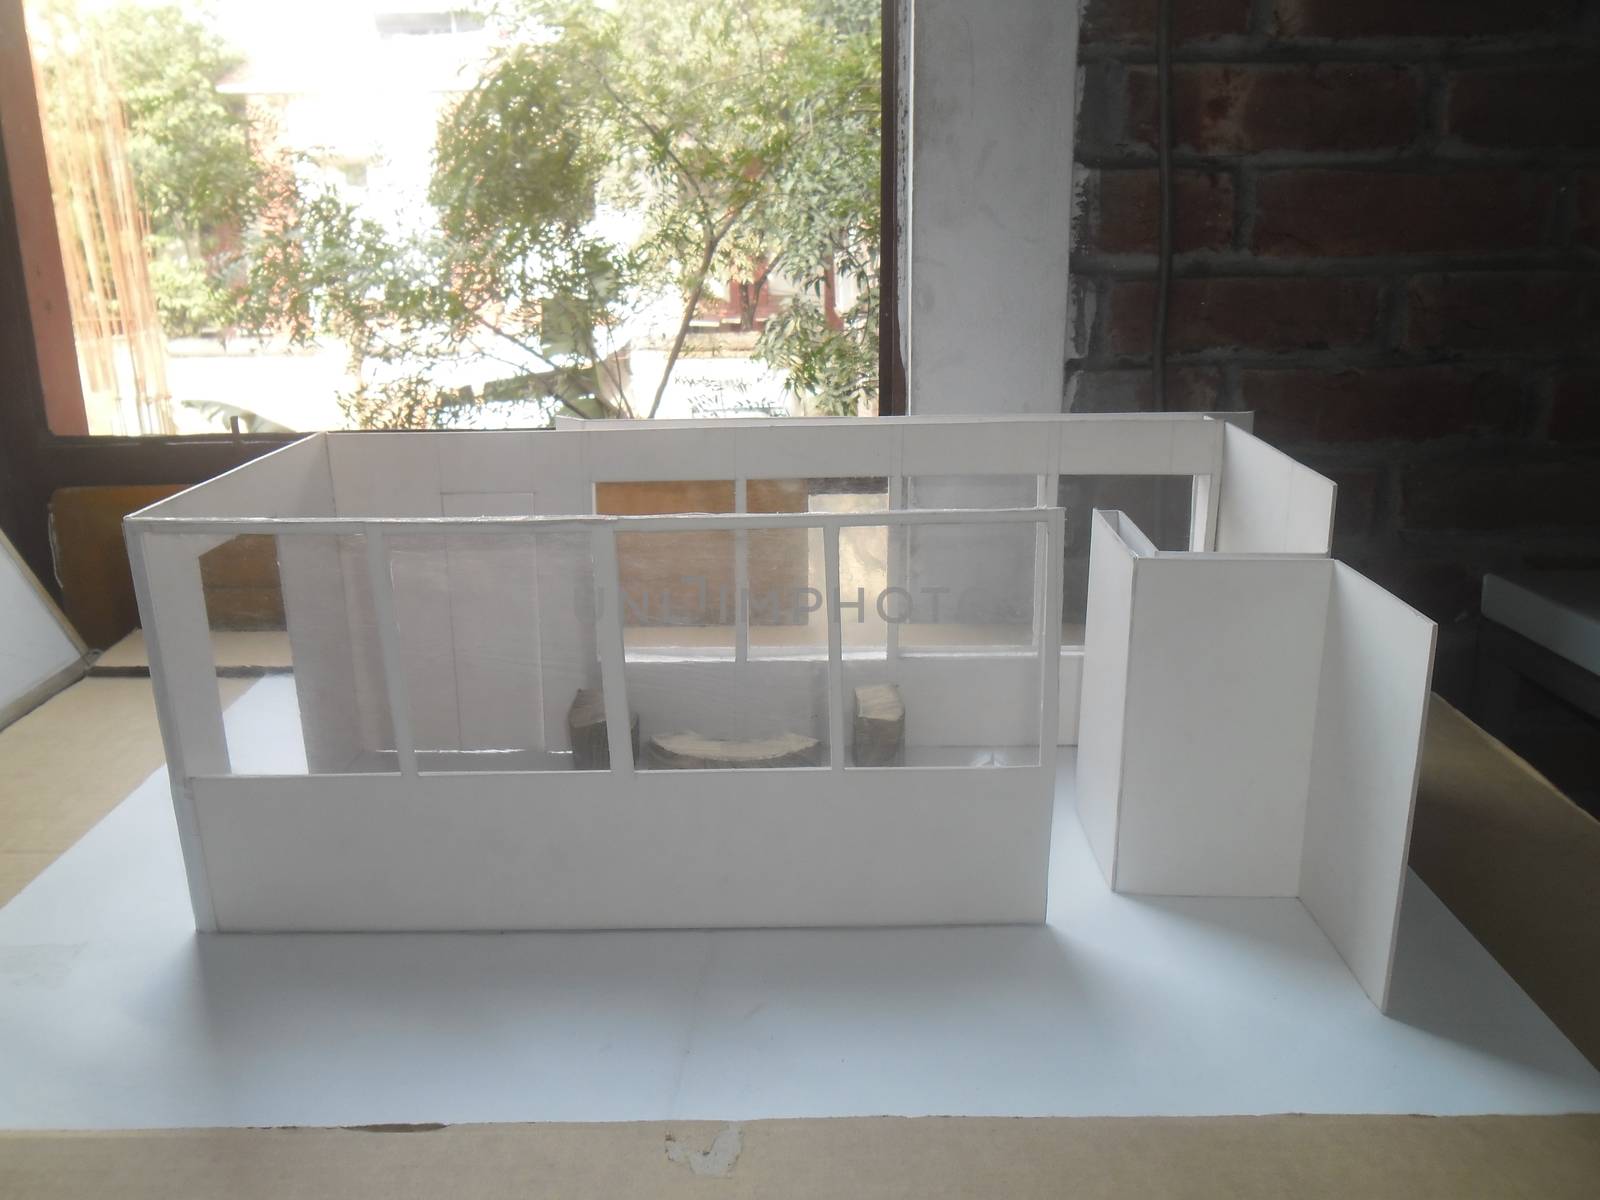 Architecture model with round seating space and large windows